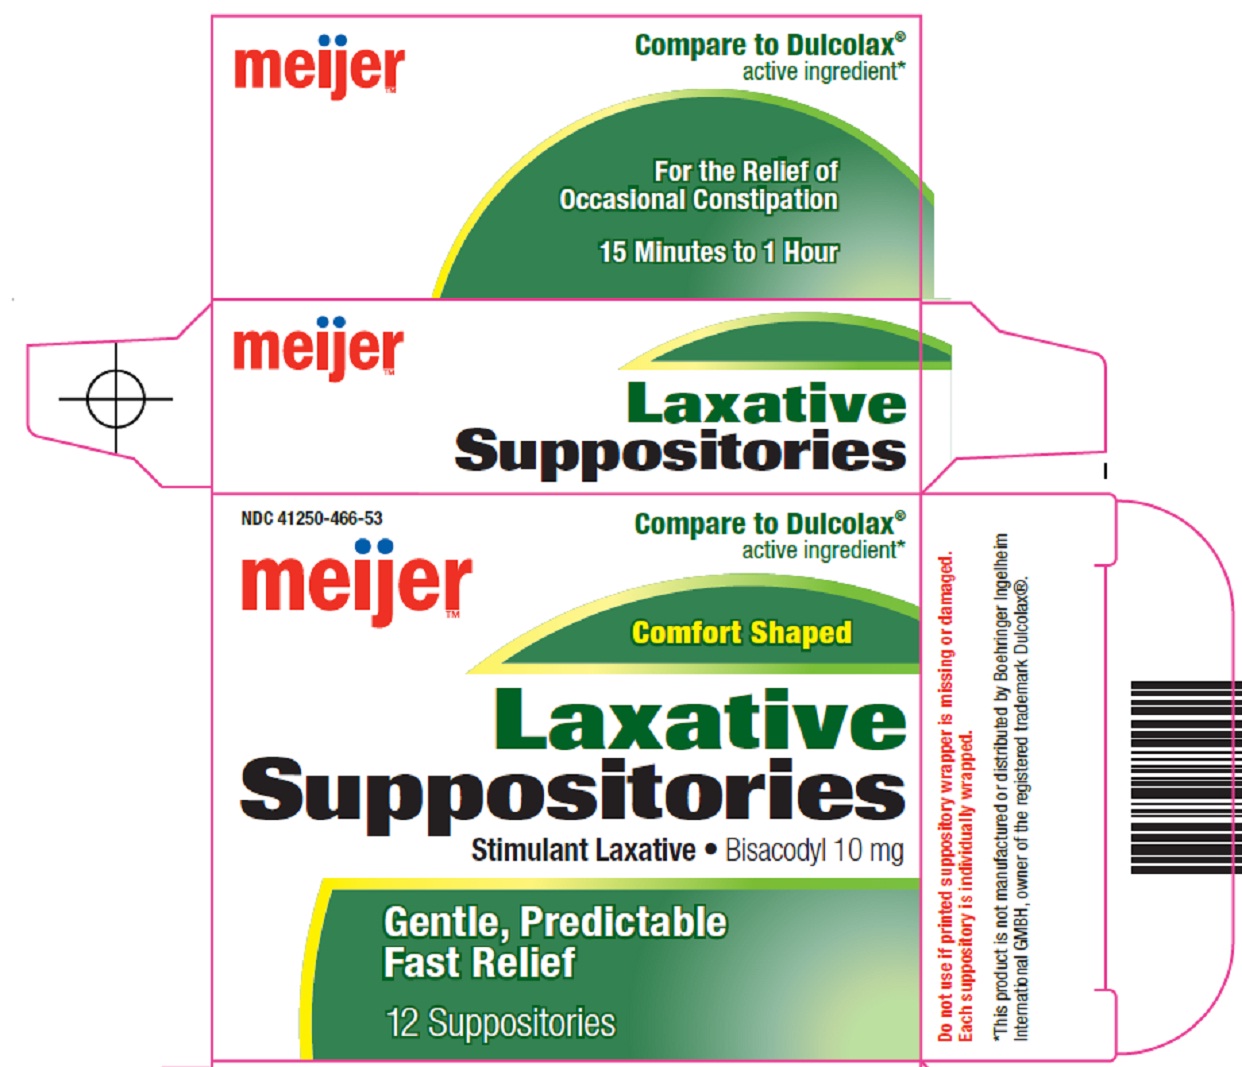 Laxative Suppositories Image 1